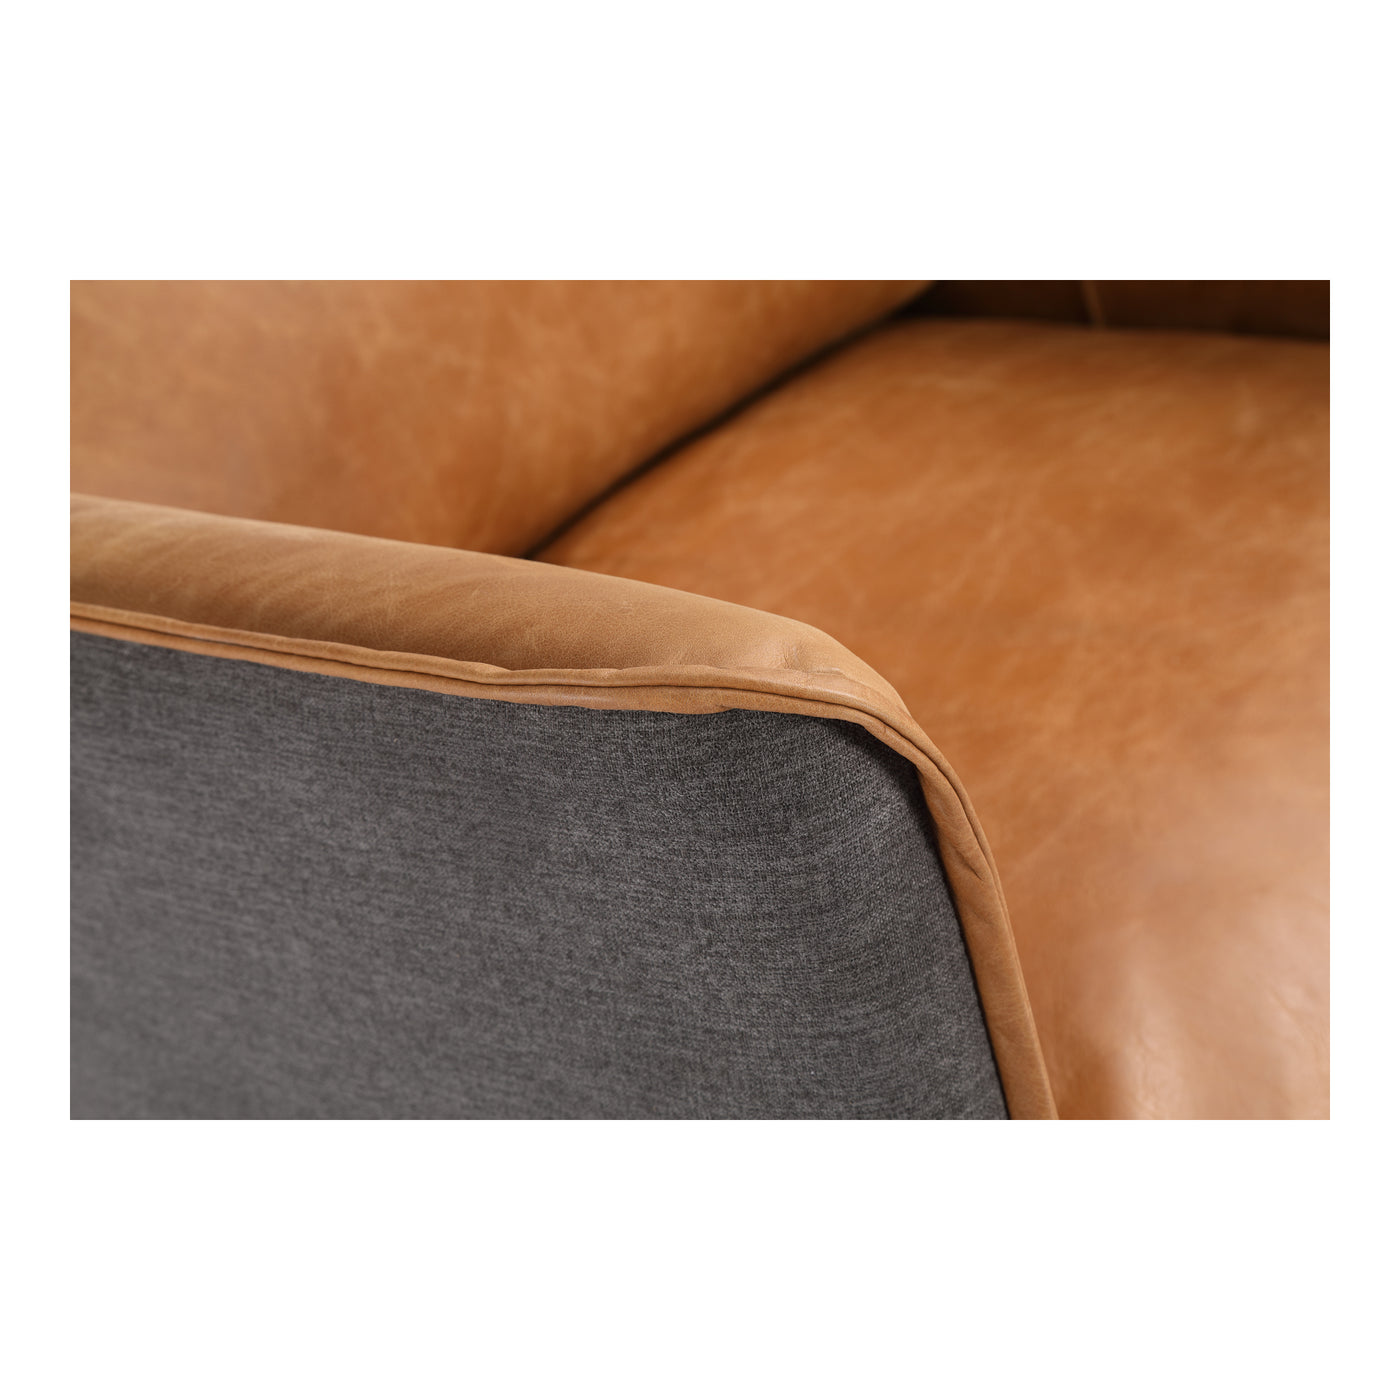 The Messina is a cozy lounge chair that your guests will want to sit in for hours. Short iron legs boast mid-century desig...